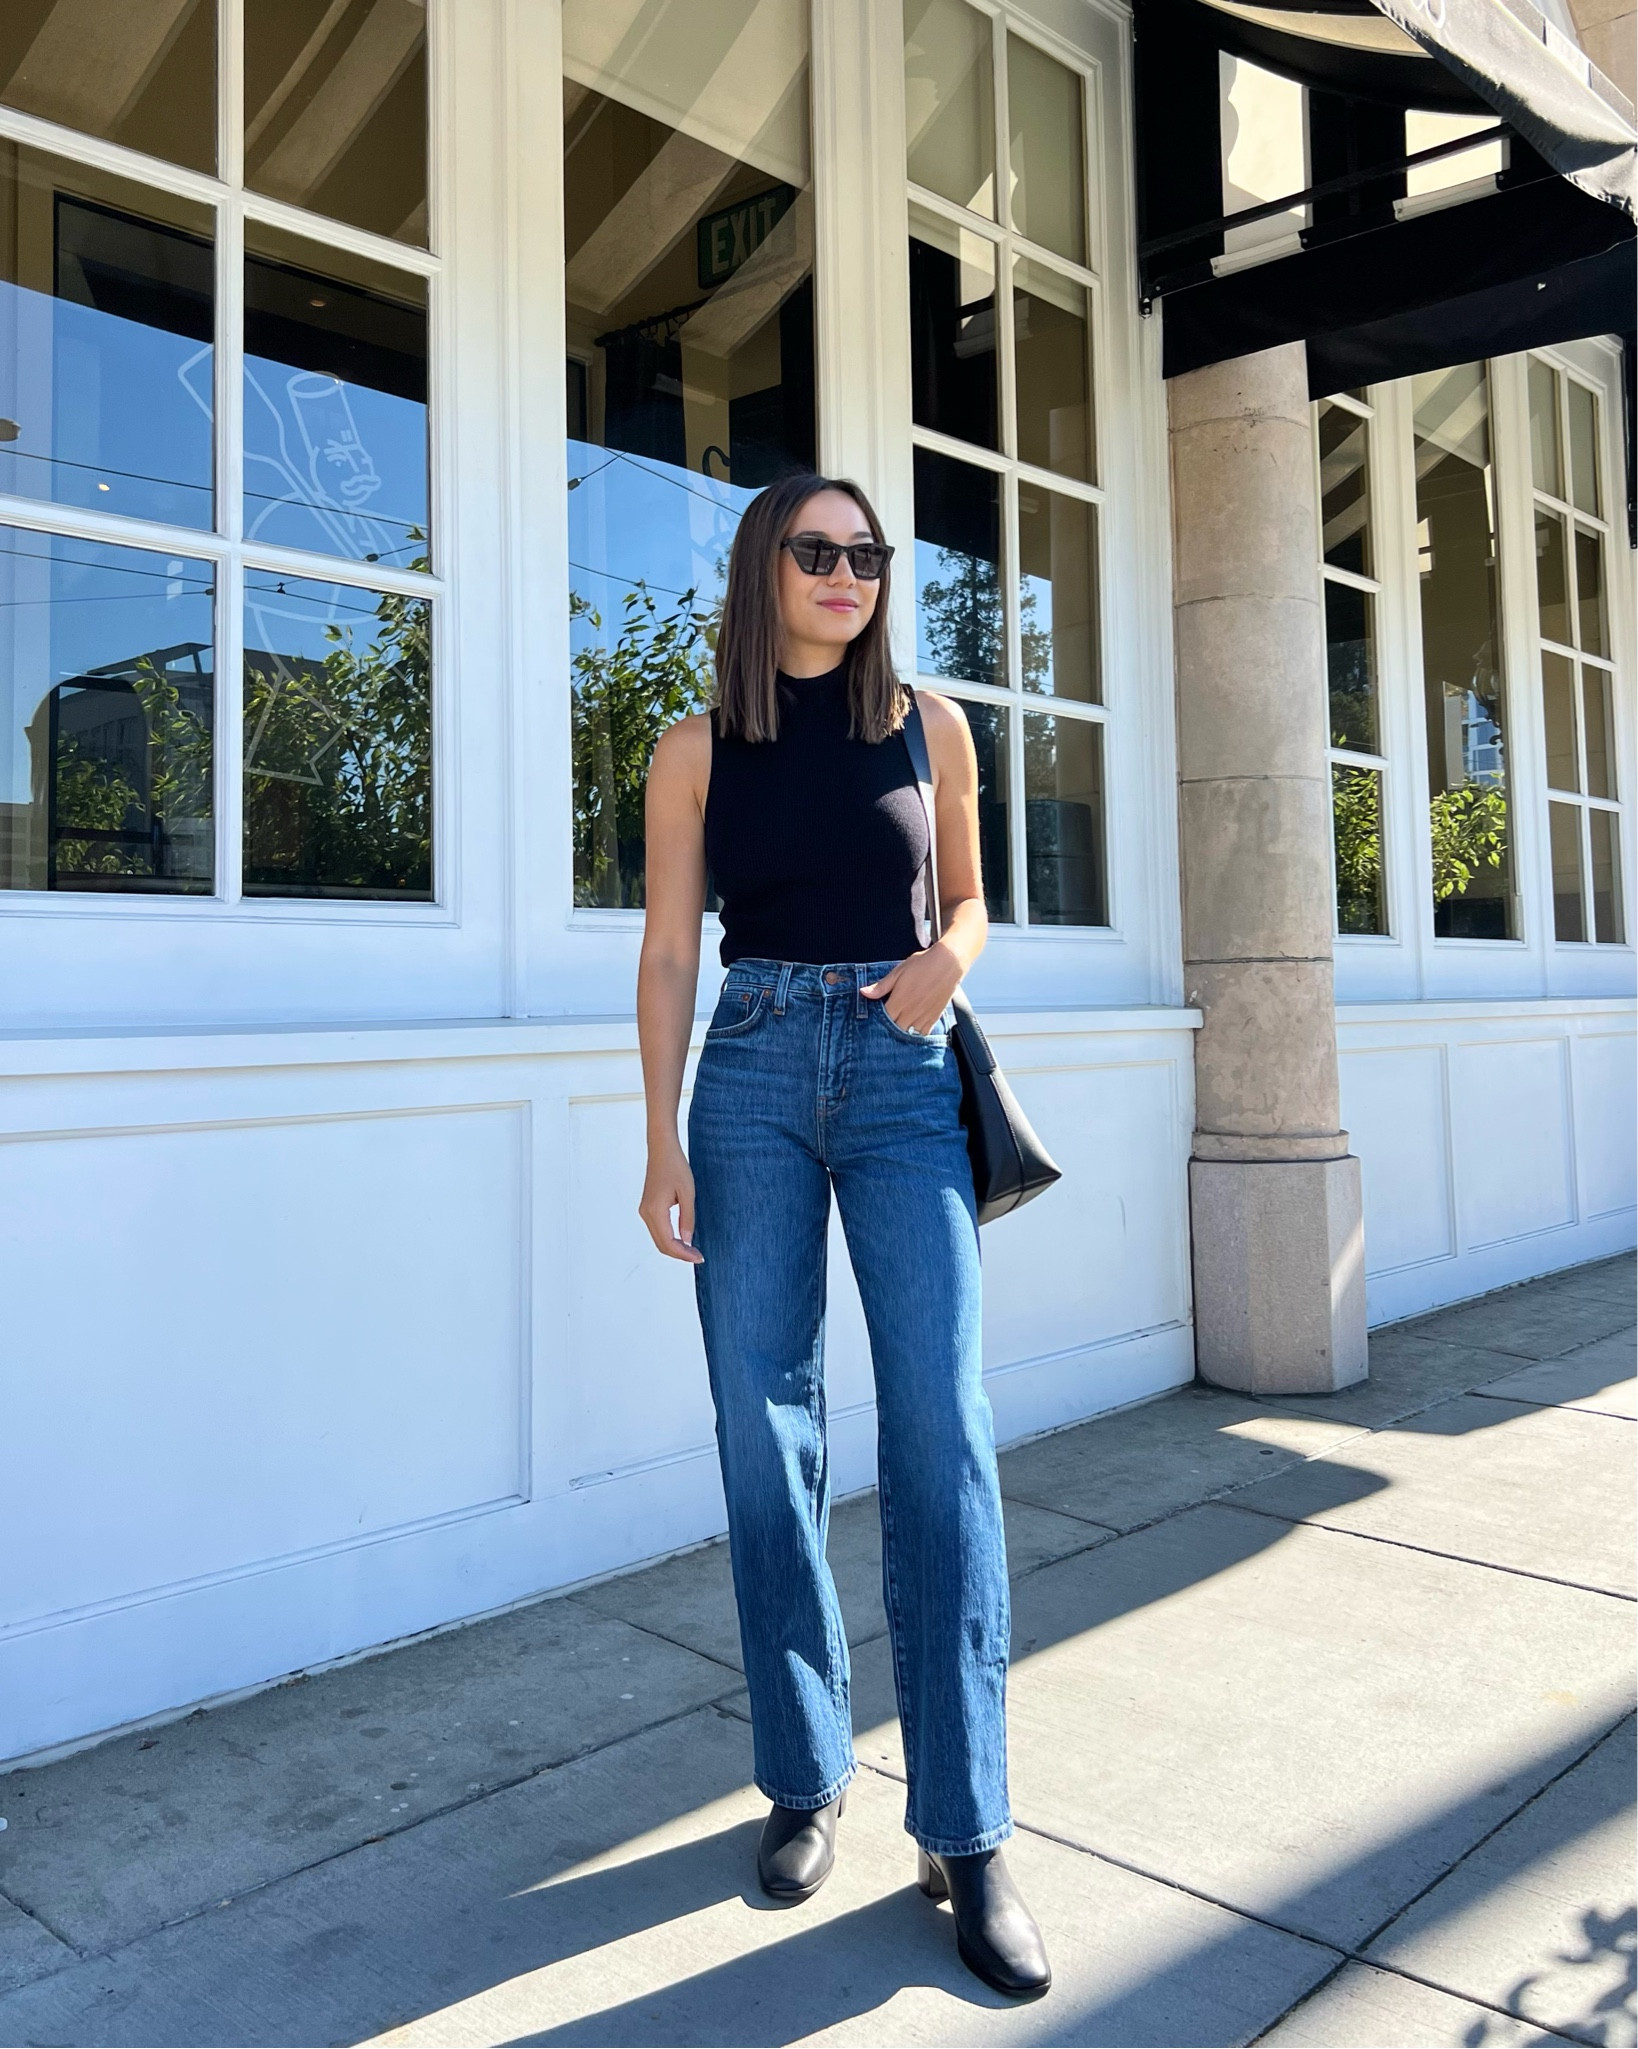 Perfect Wide Leg Jeans from Old Navy, Gallery posted by Jessanotherday